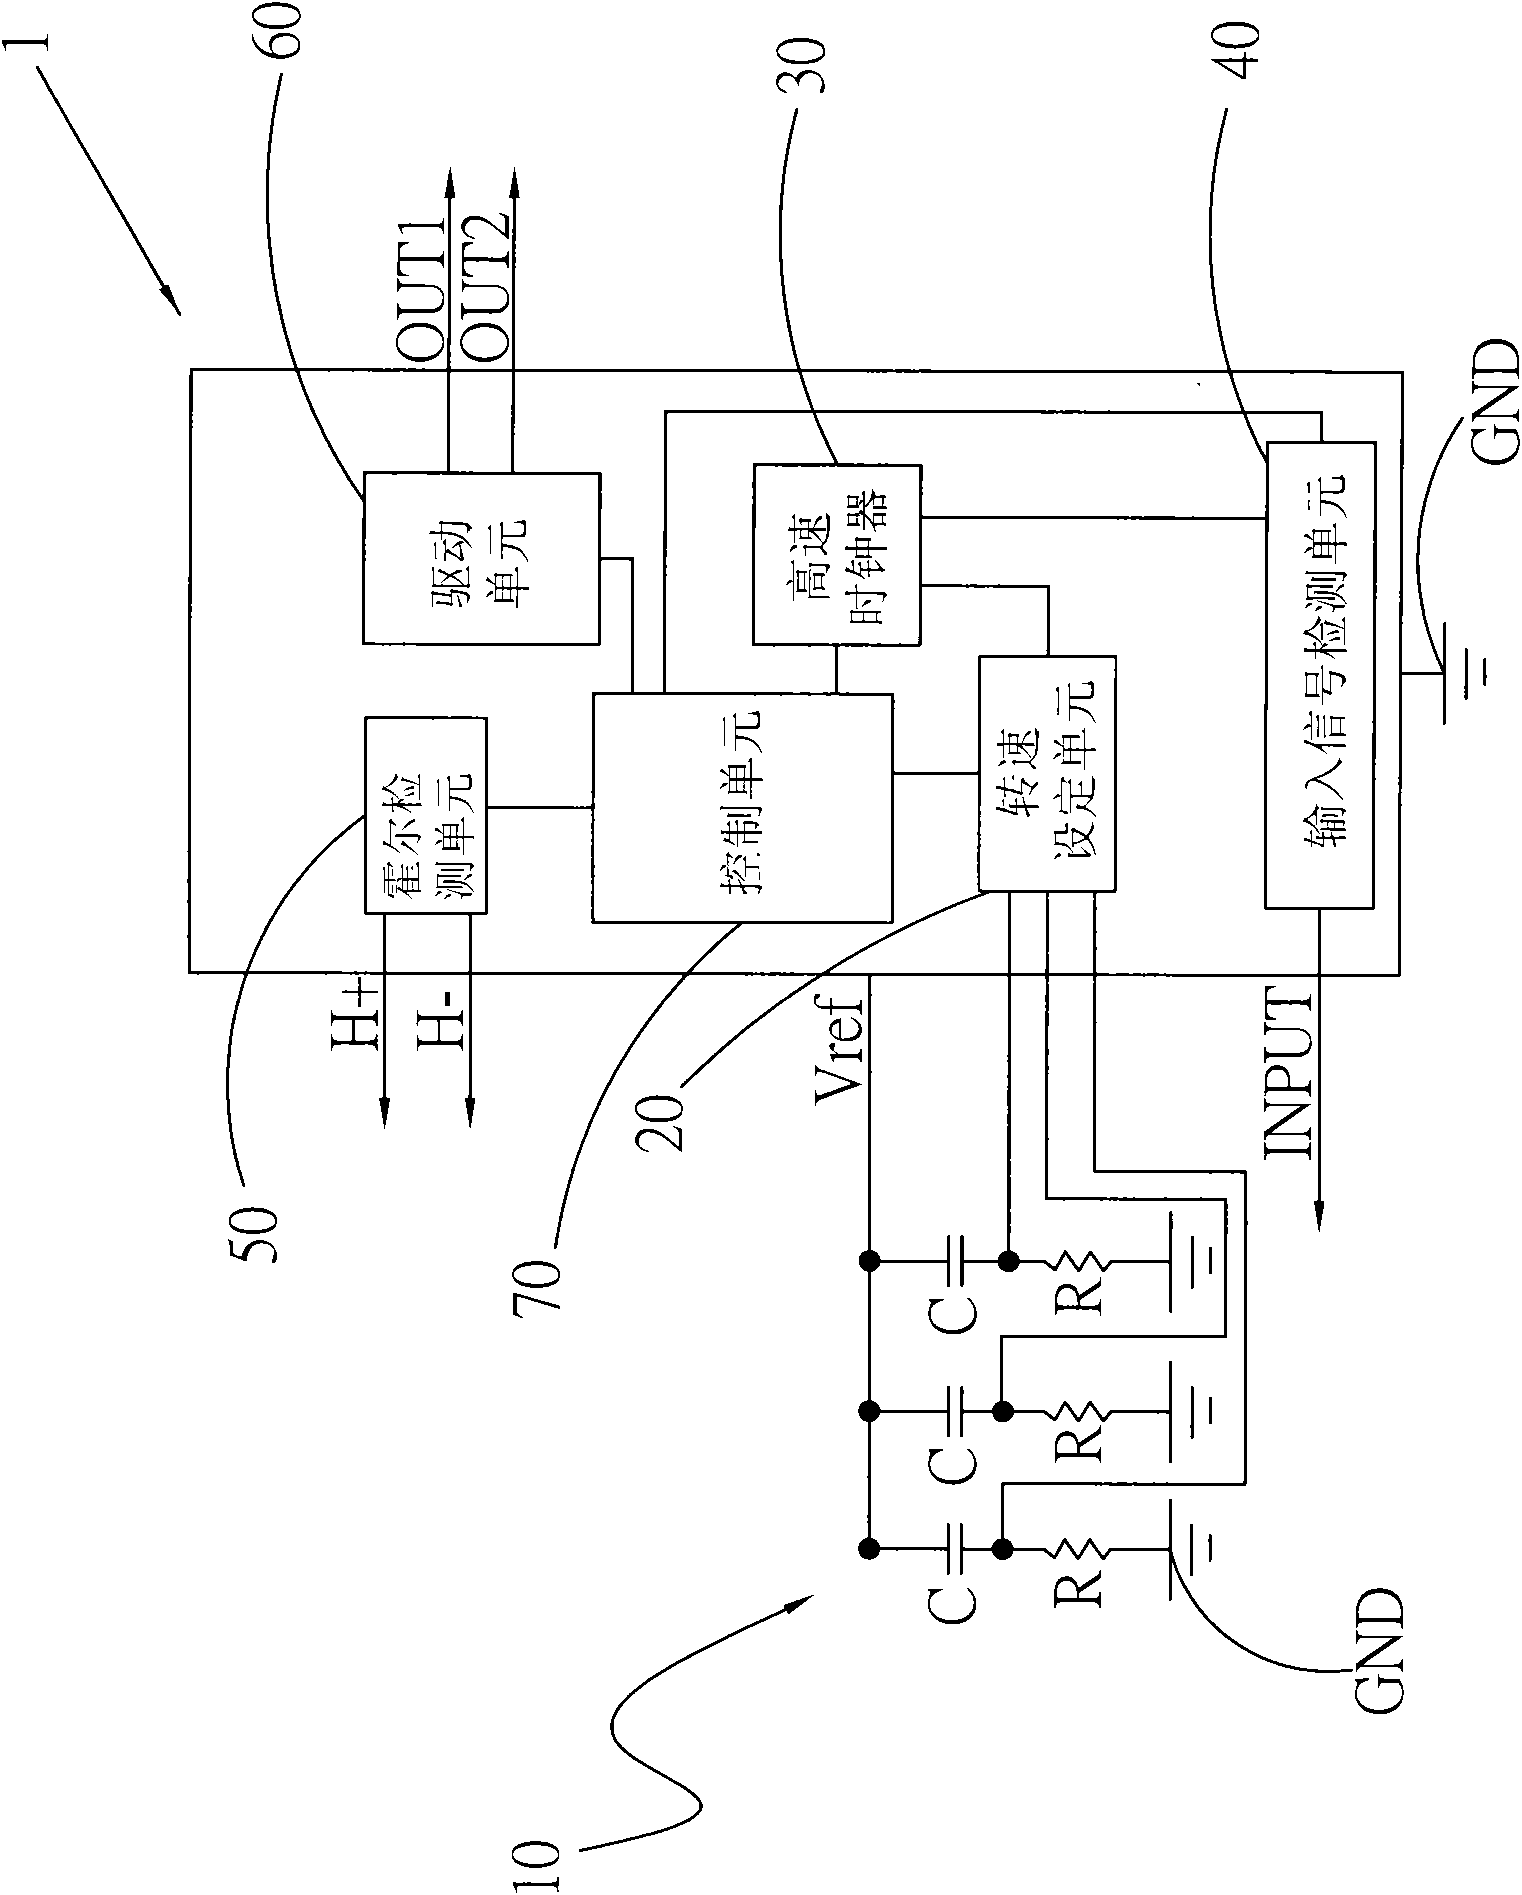 Method for setting rotating speed of fan by utilizing RC frequency